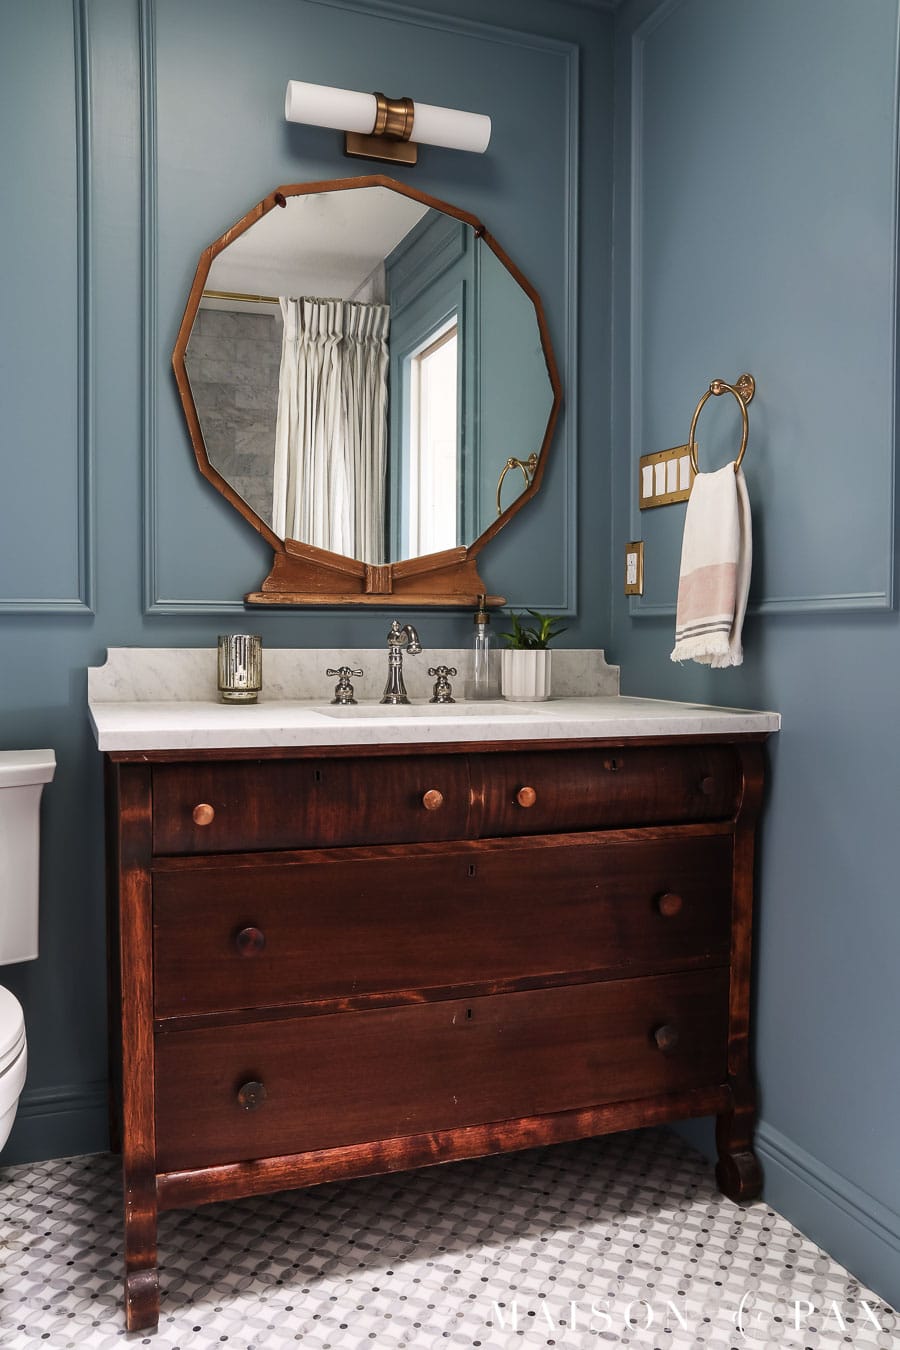 Blue bathroom with box trim on walls, wood vanity, and gold accents